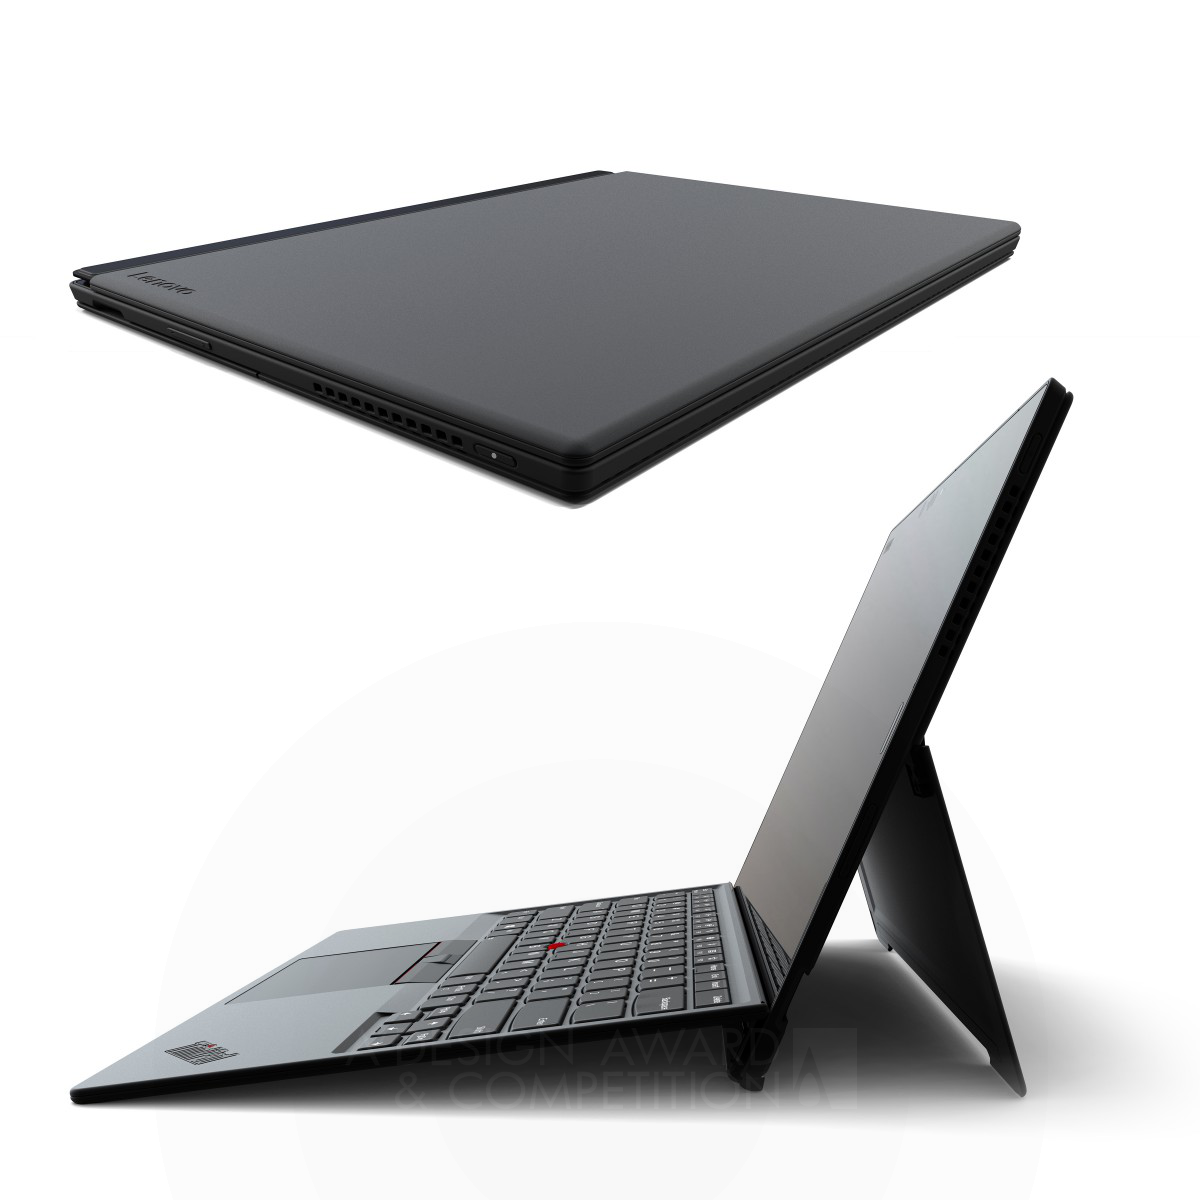 ThinkPad X1 Tablet Computer by Lenovo Design Group